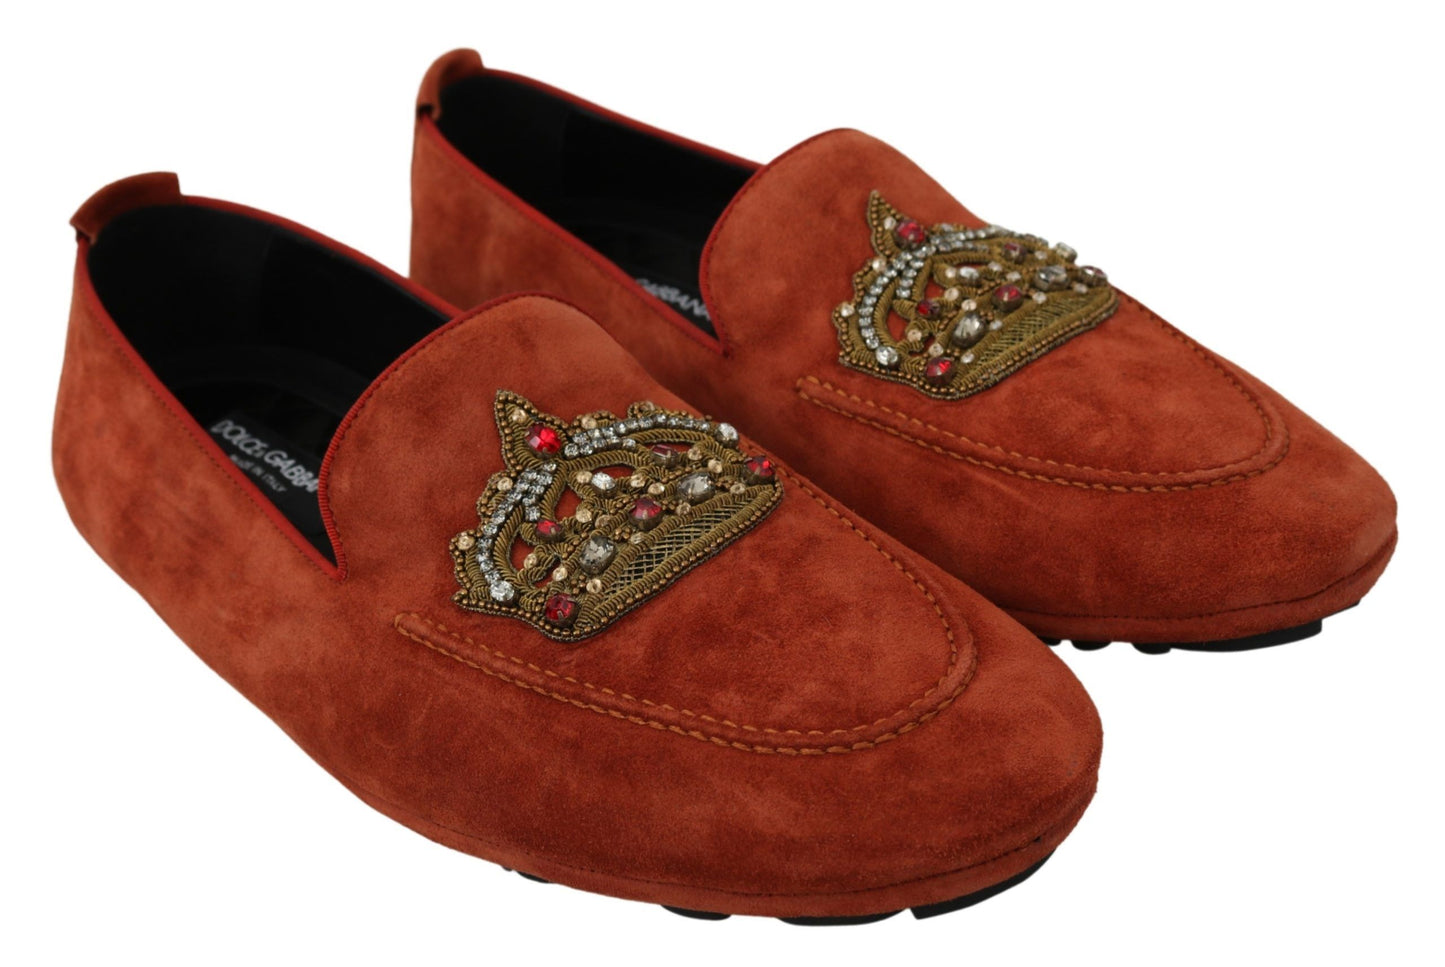 Orange Leather Moccasins Crystal Crown Slippers Shoes